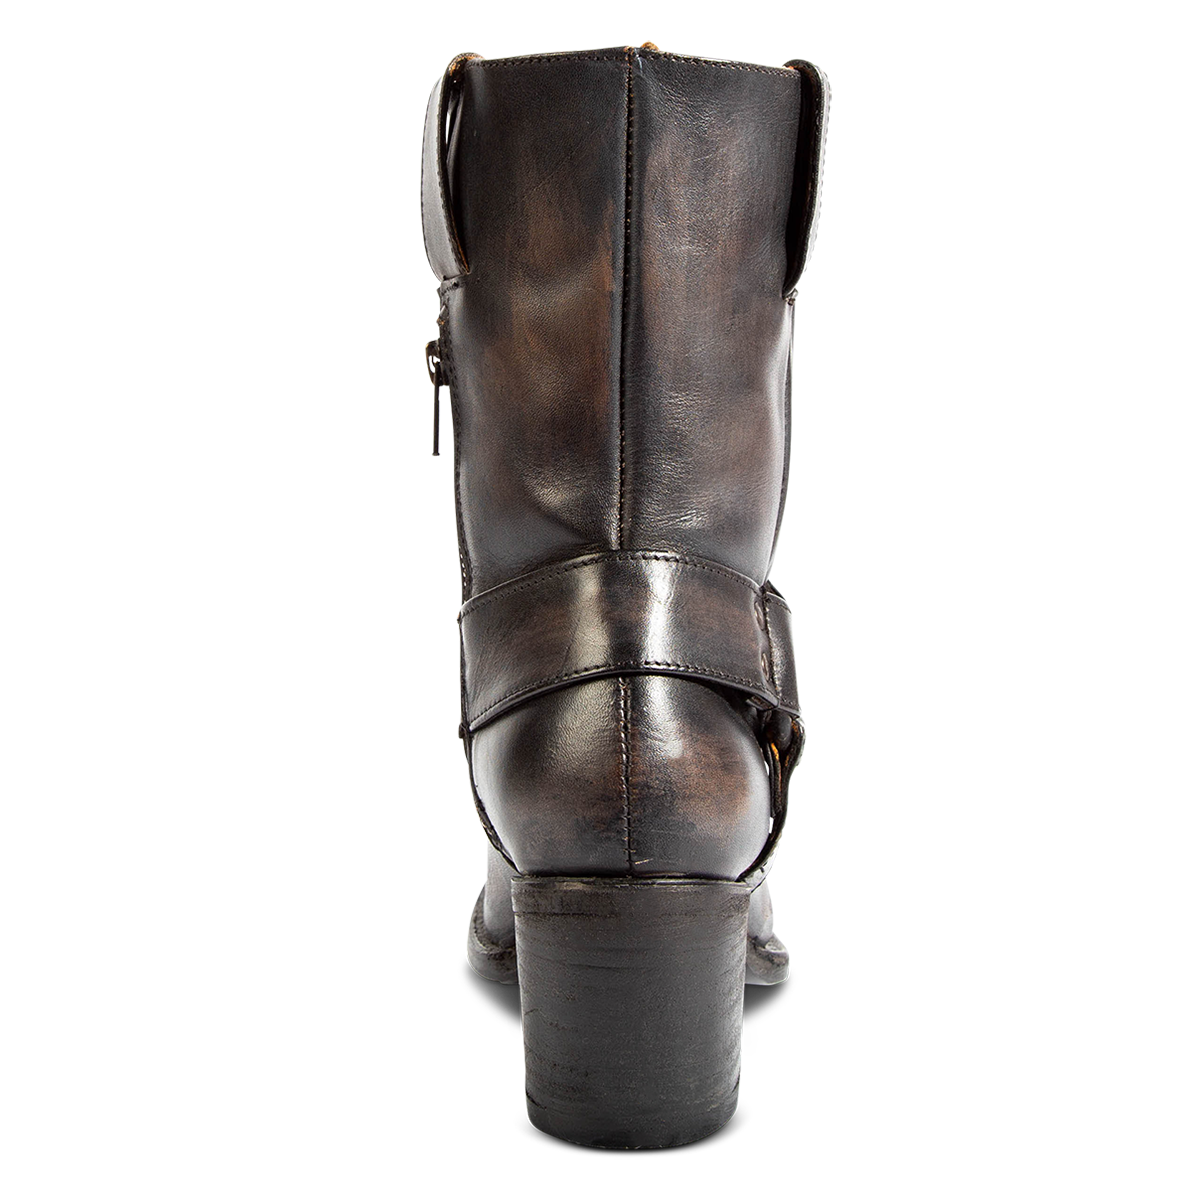 Back view showing FREEBIRD women's Darcy black boot with leather pull straps, inside zip closure, and square toe